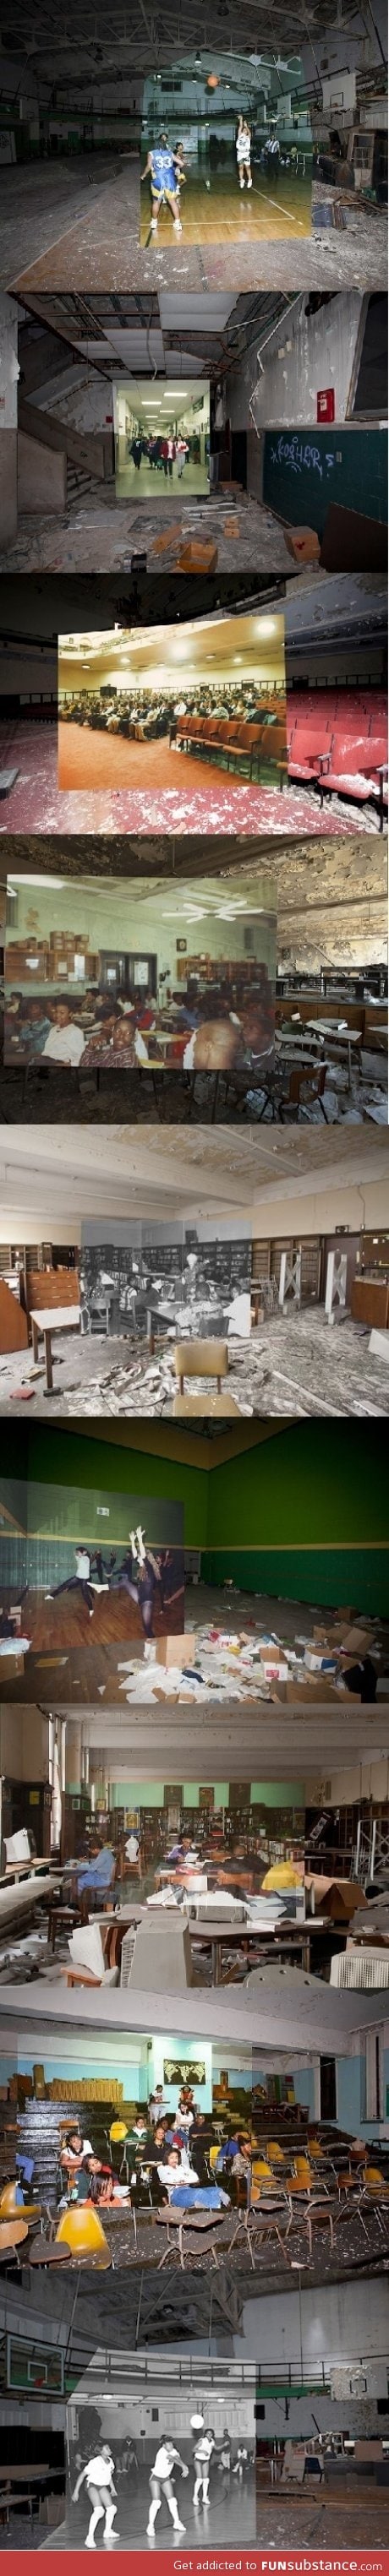 Detroit before and after